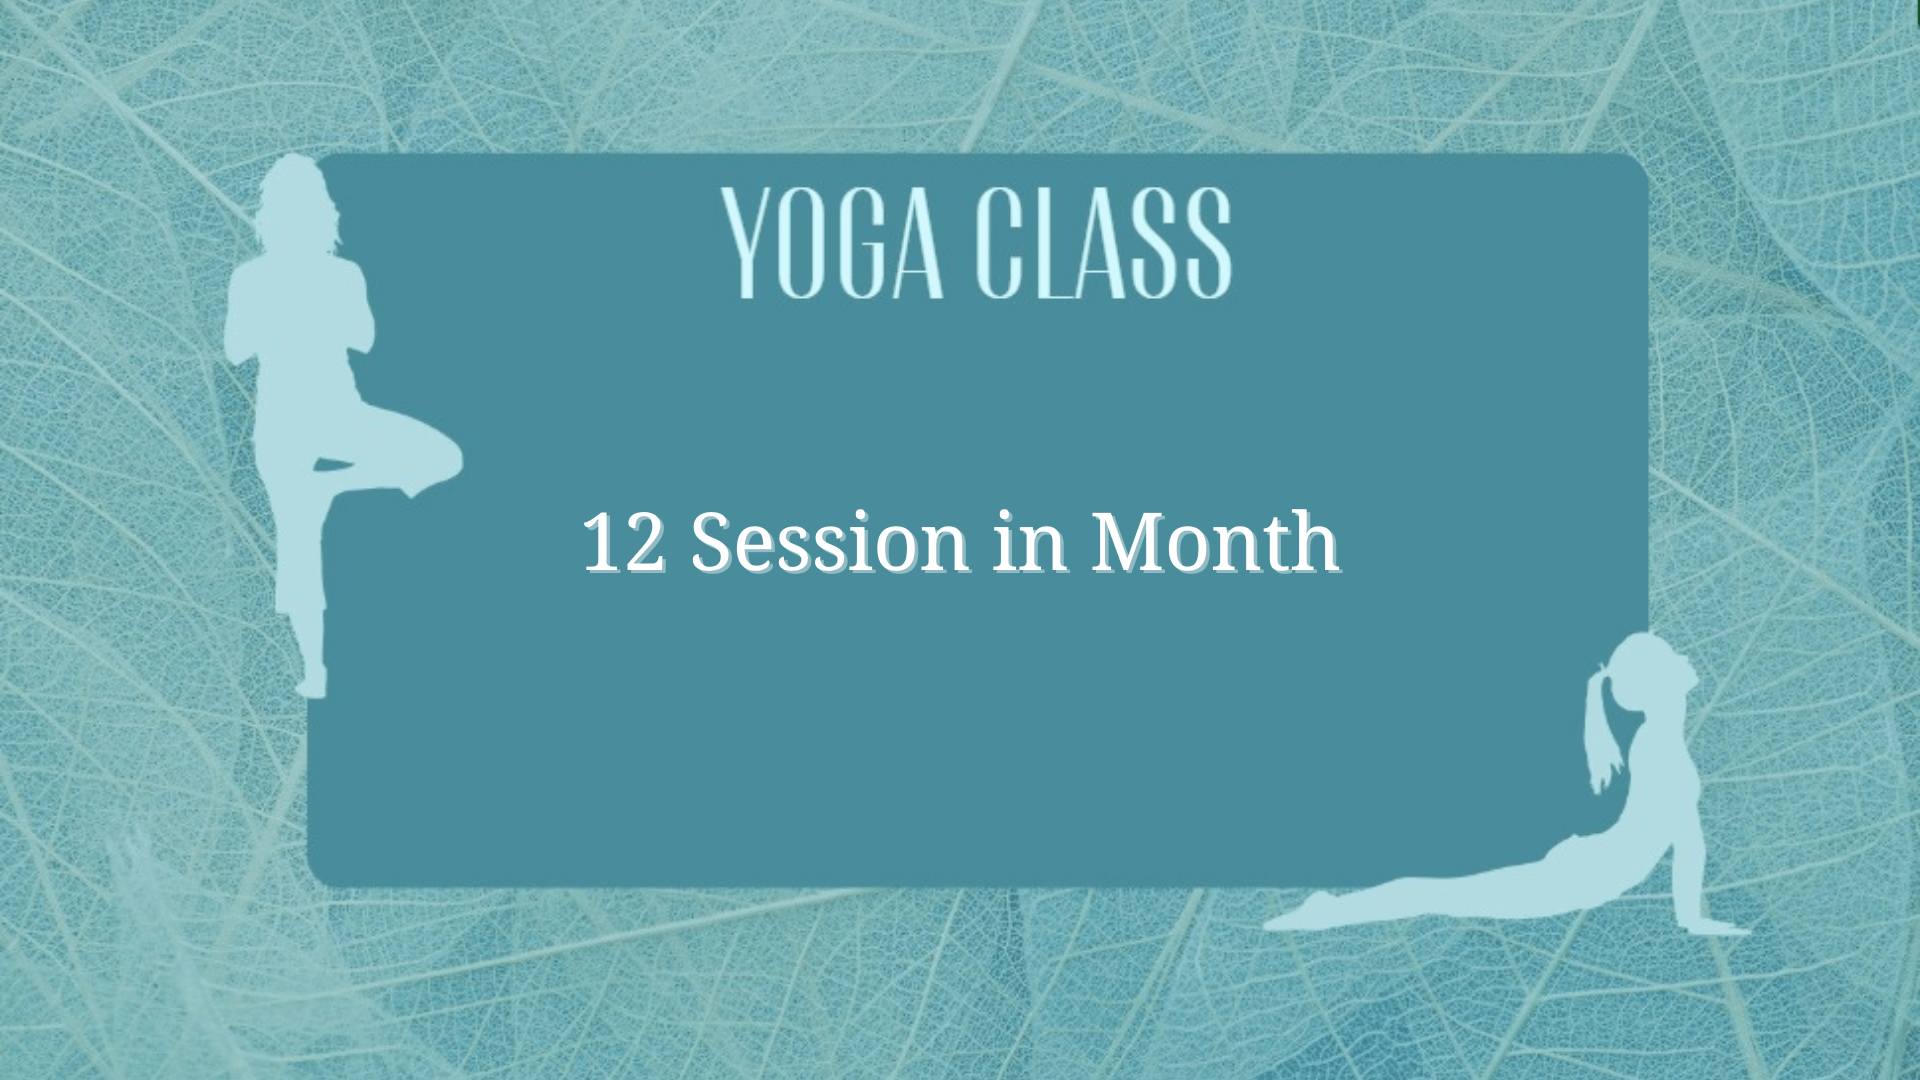 12 sessions a month